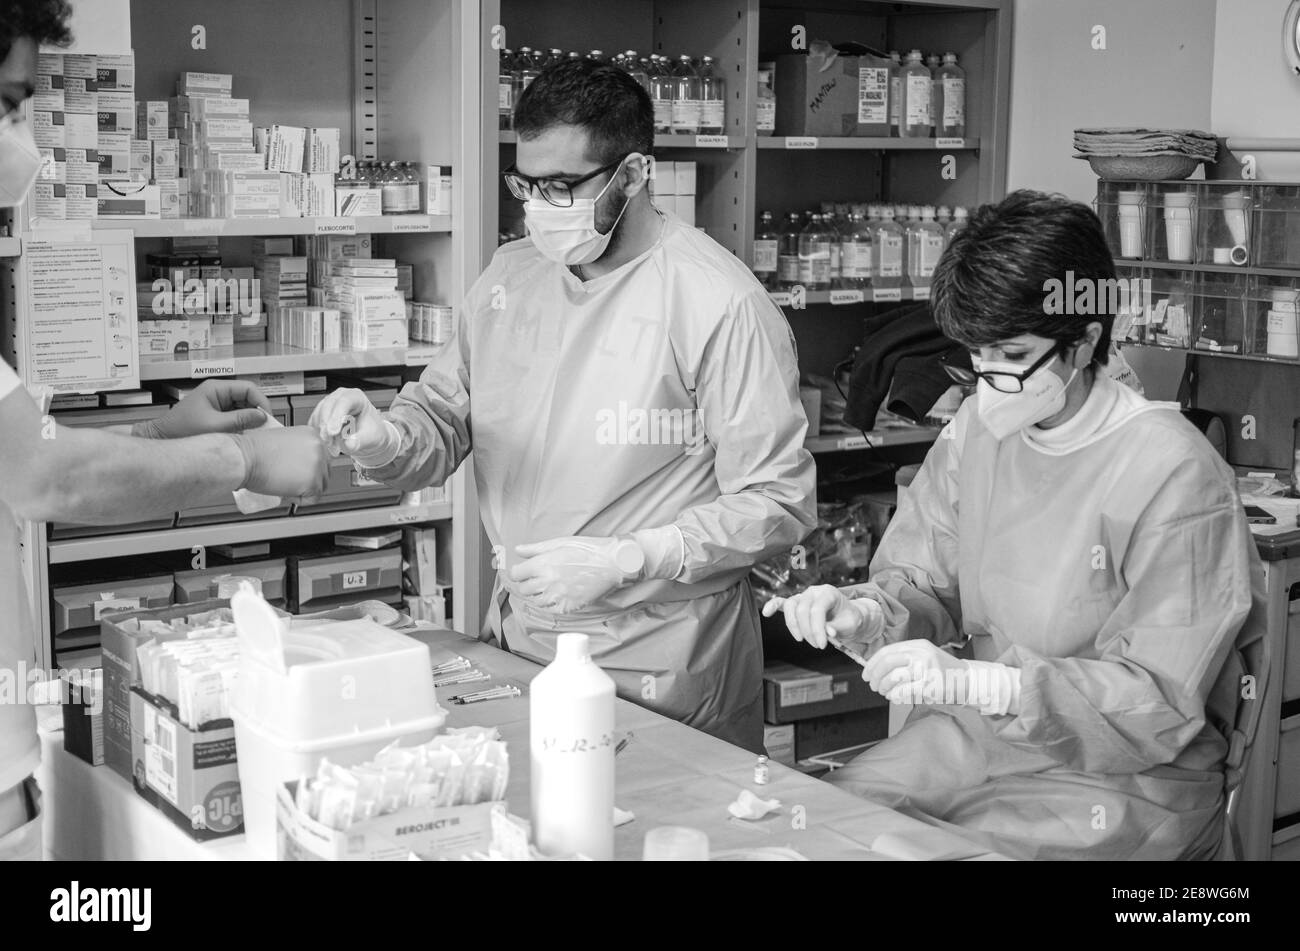 Cremona, Lombardy, Italy - Jan 29th 2021 Dr Aiolo and equipe preparing doses of Pfizer Biontech covid-19 vaccine for vaccination Stock Photo